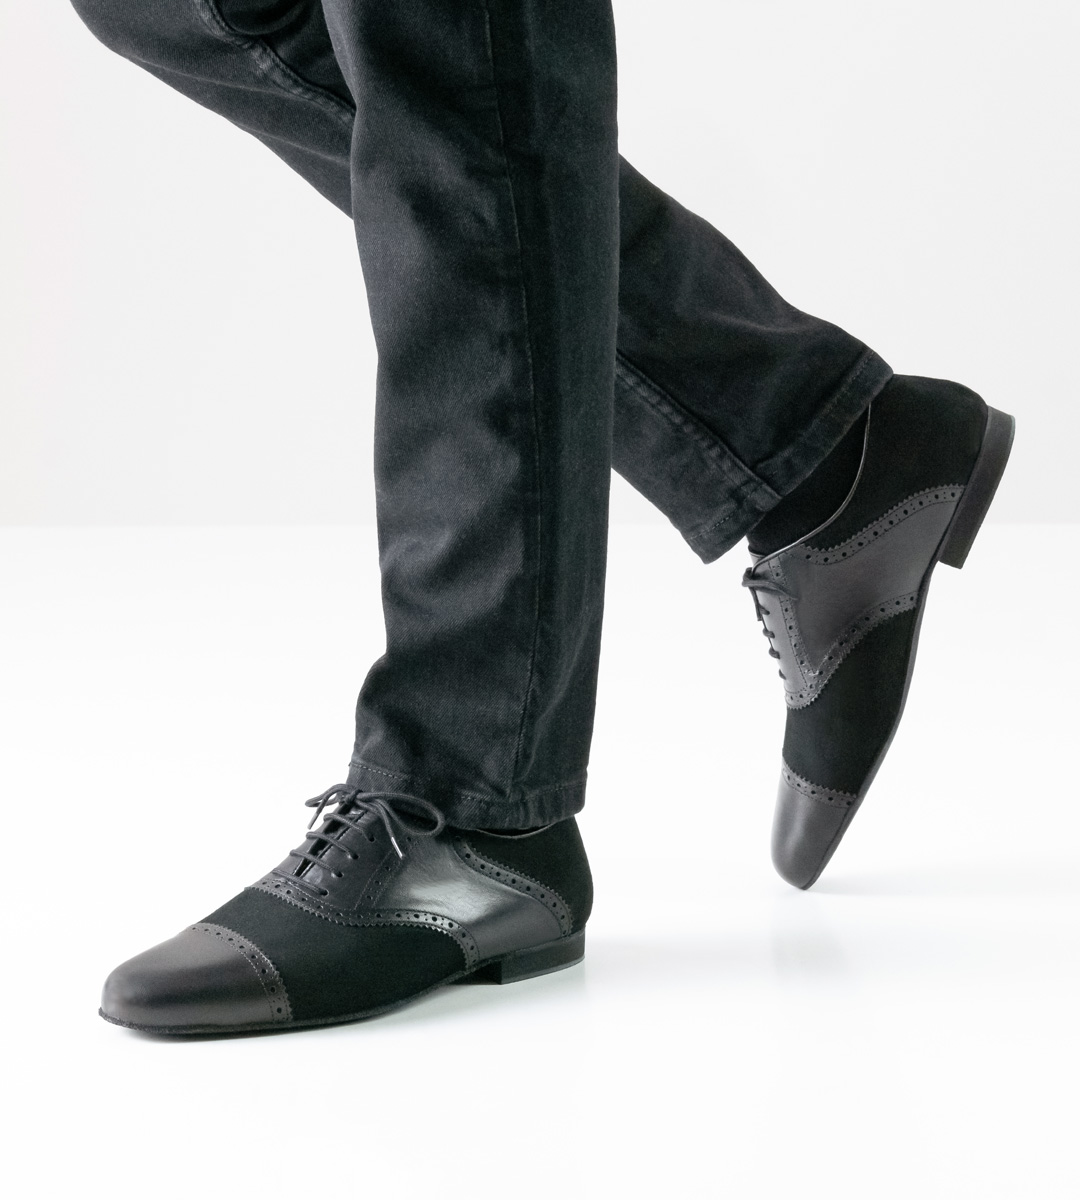 Jeans in black in combination with black men's dance shoe in suede and leather